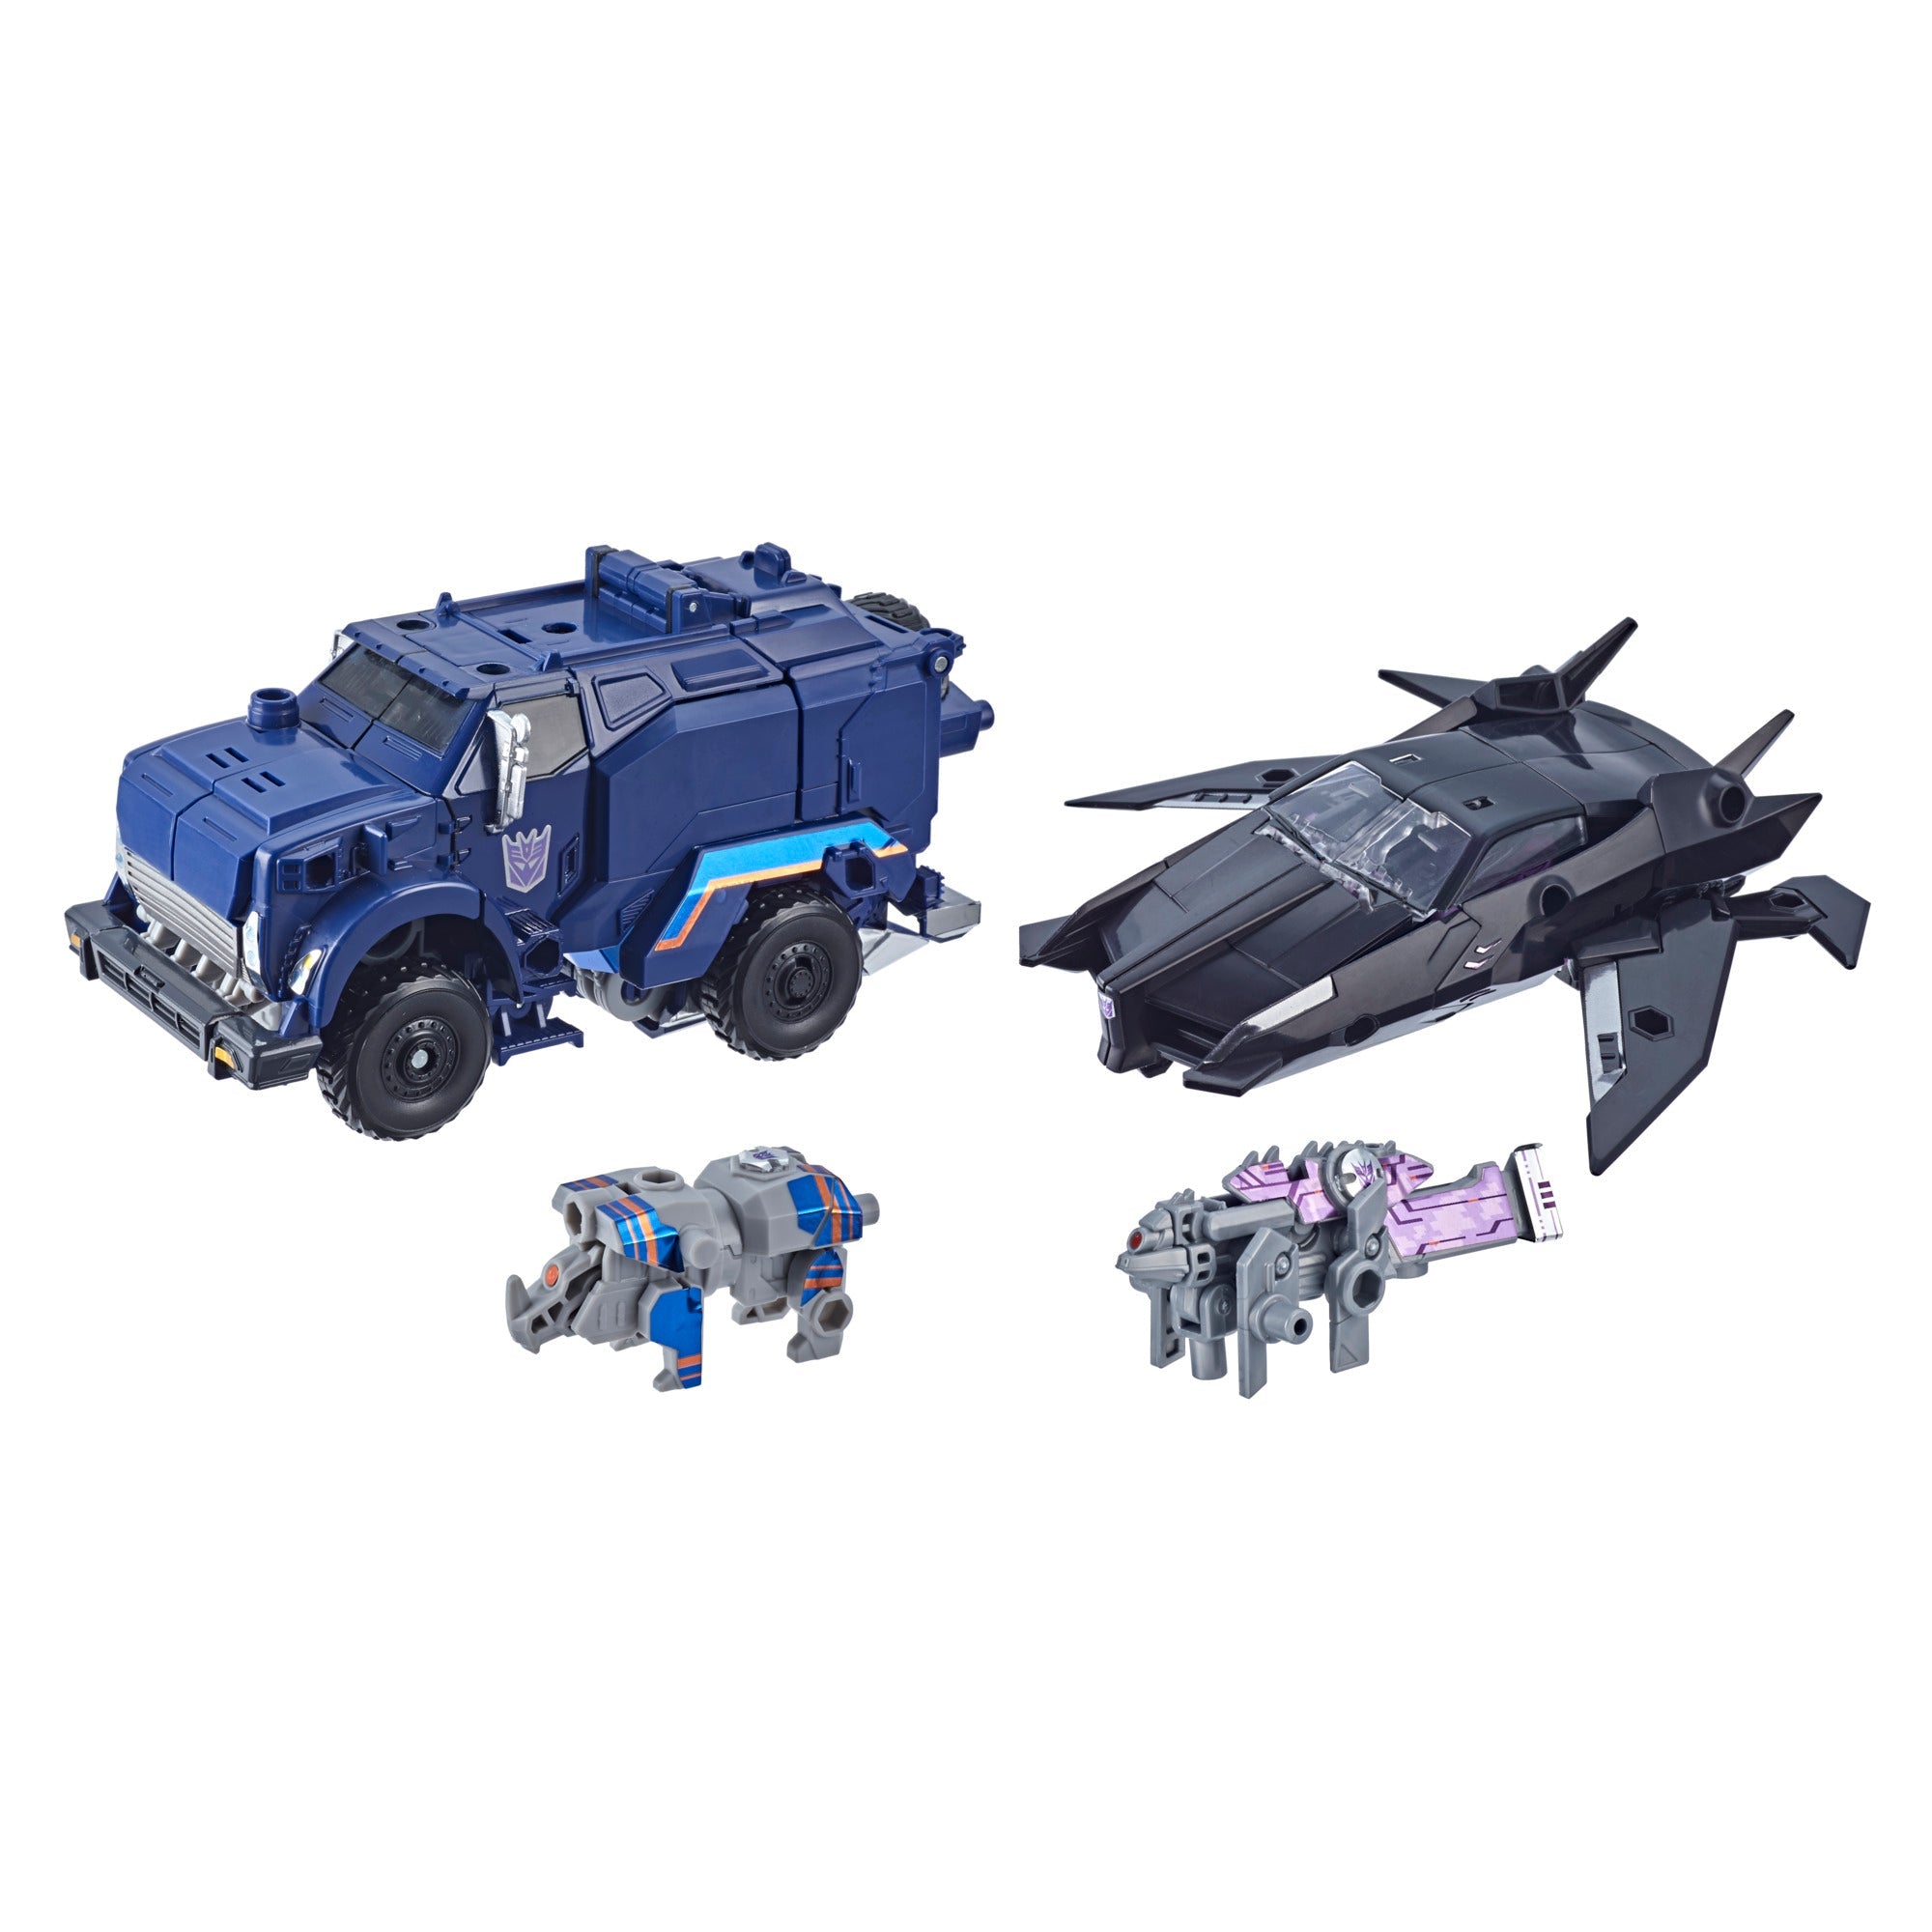 Transformers: Prime War Breakdown and Vehicon 2-Pack (Hasbro Pulse Exclusive)